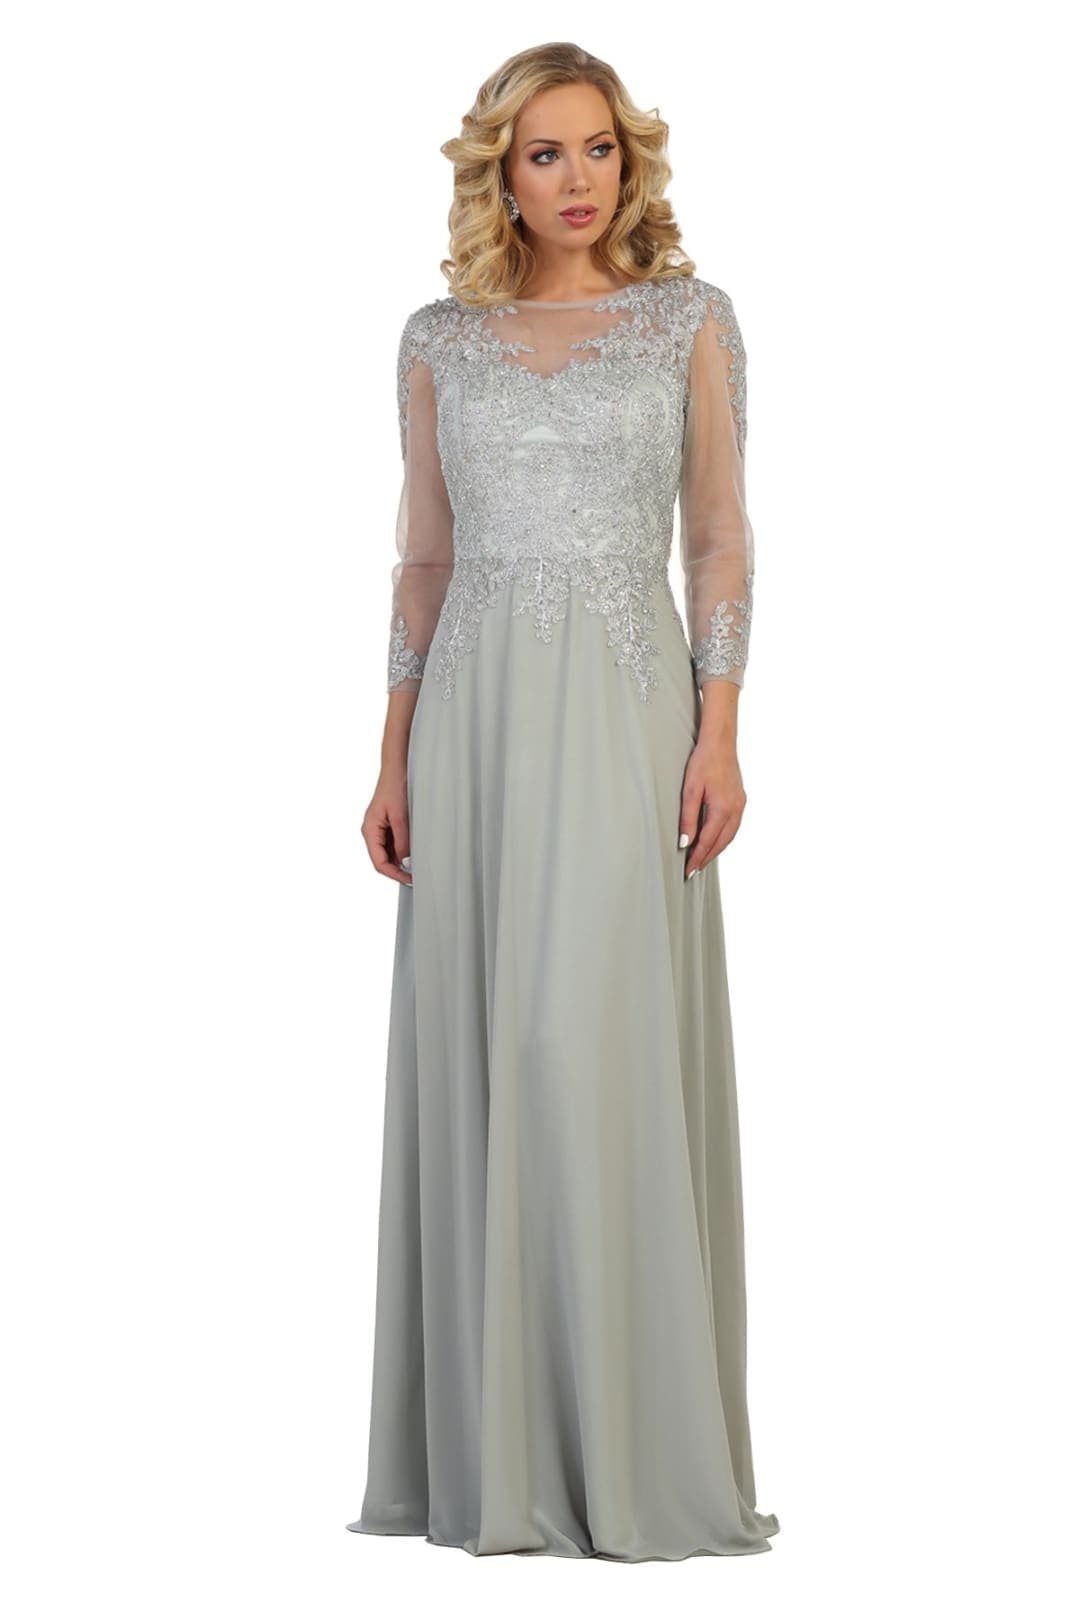 May Queen MQ1549 Modern Mother of the Bride Dress - SILVER / S